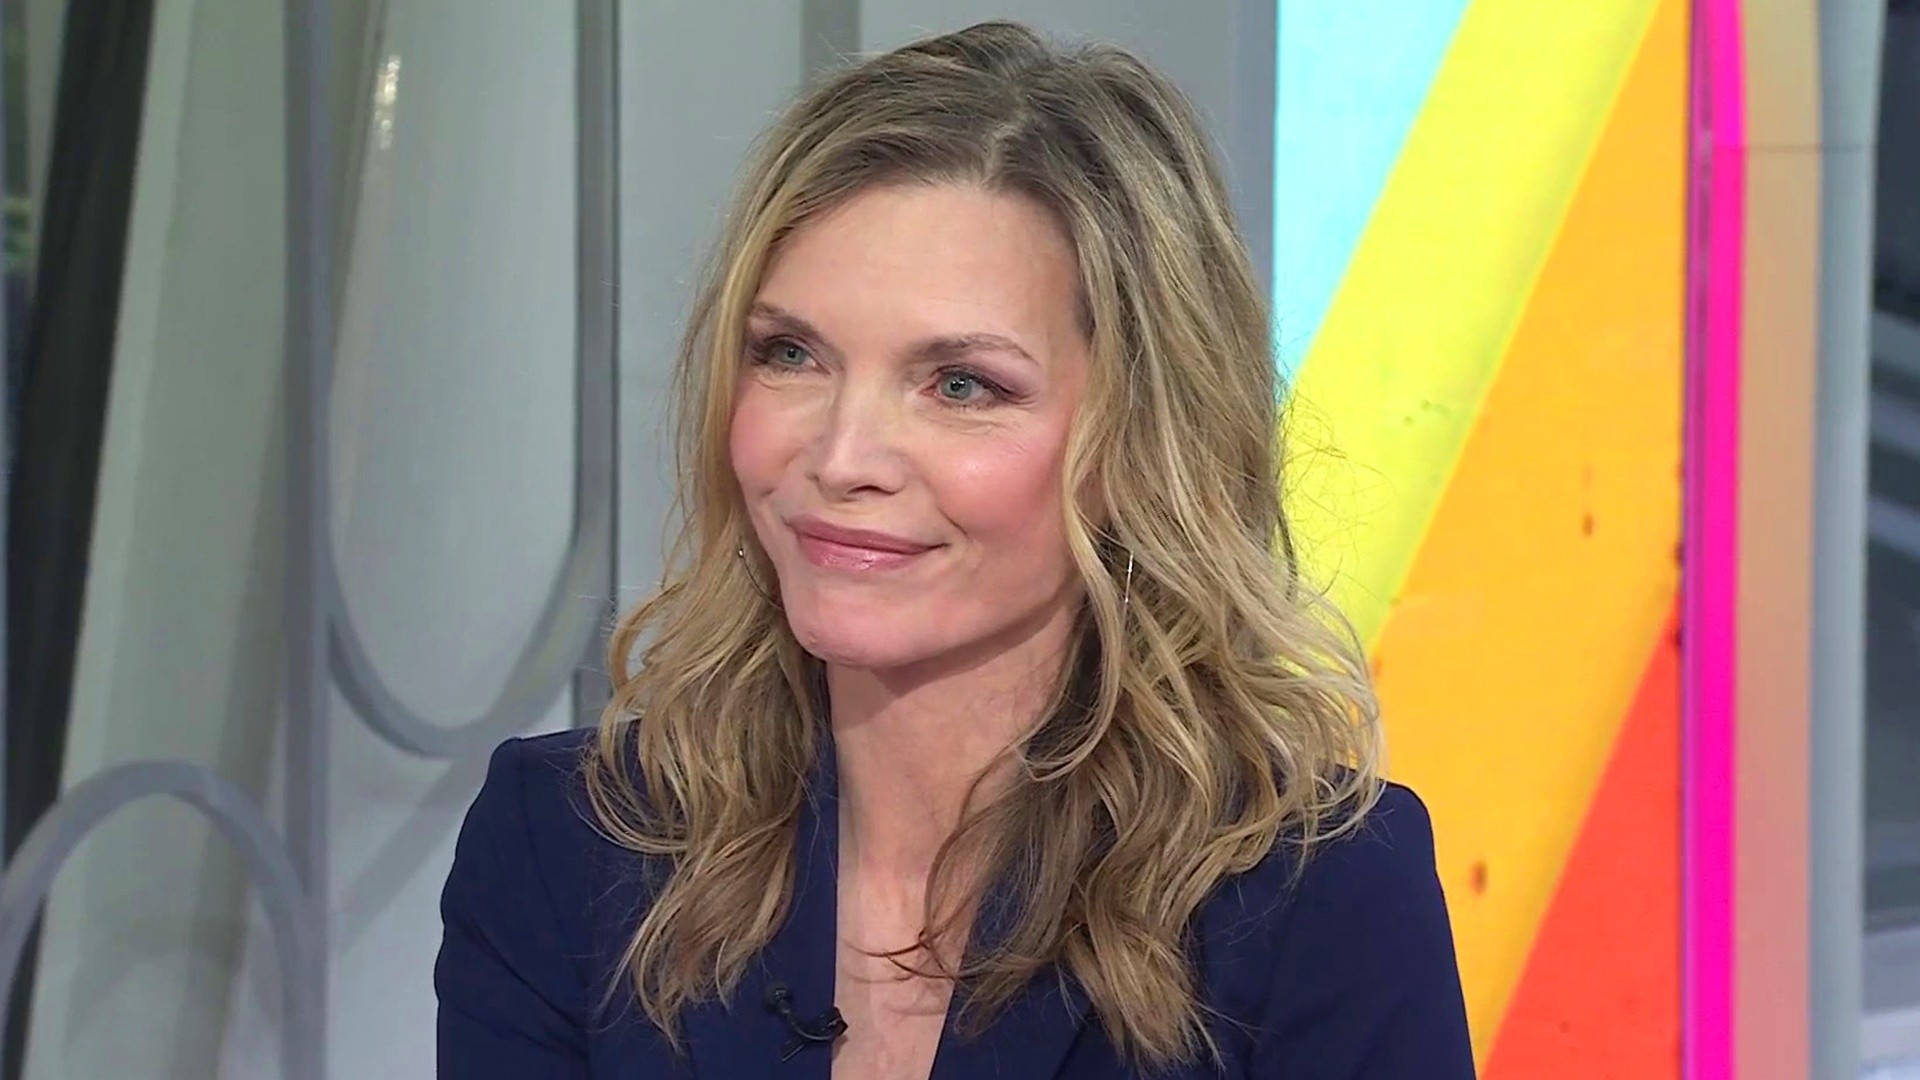 Hollywood star Michelle Pfeiffer in an interview on "The Today Show". Wallpaper